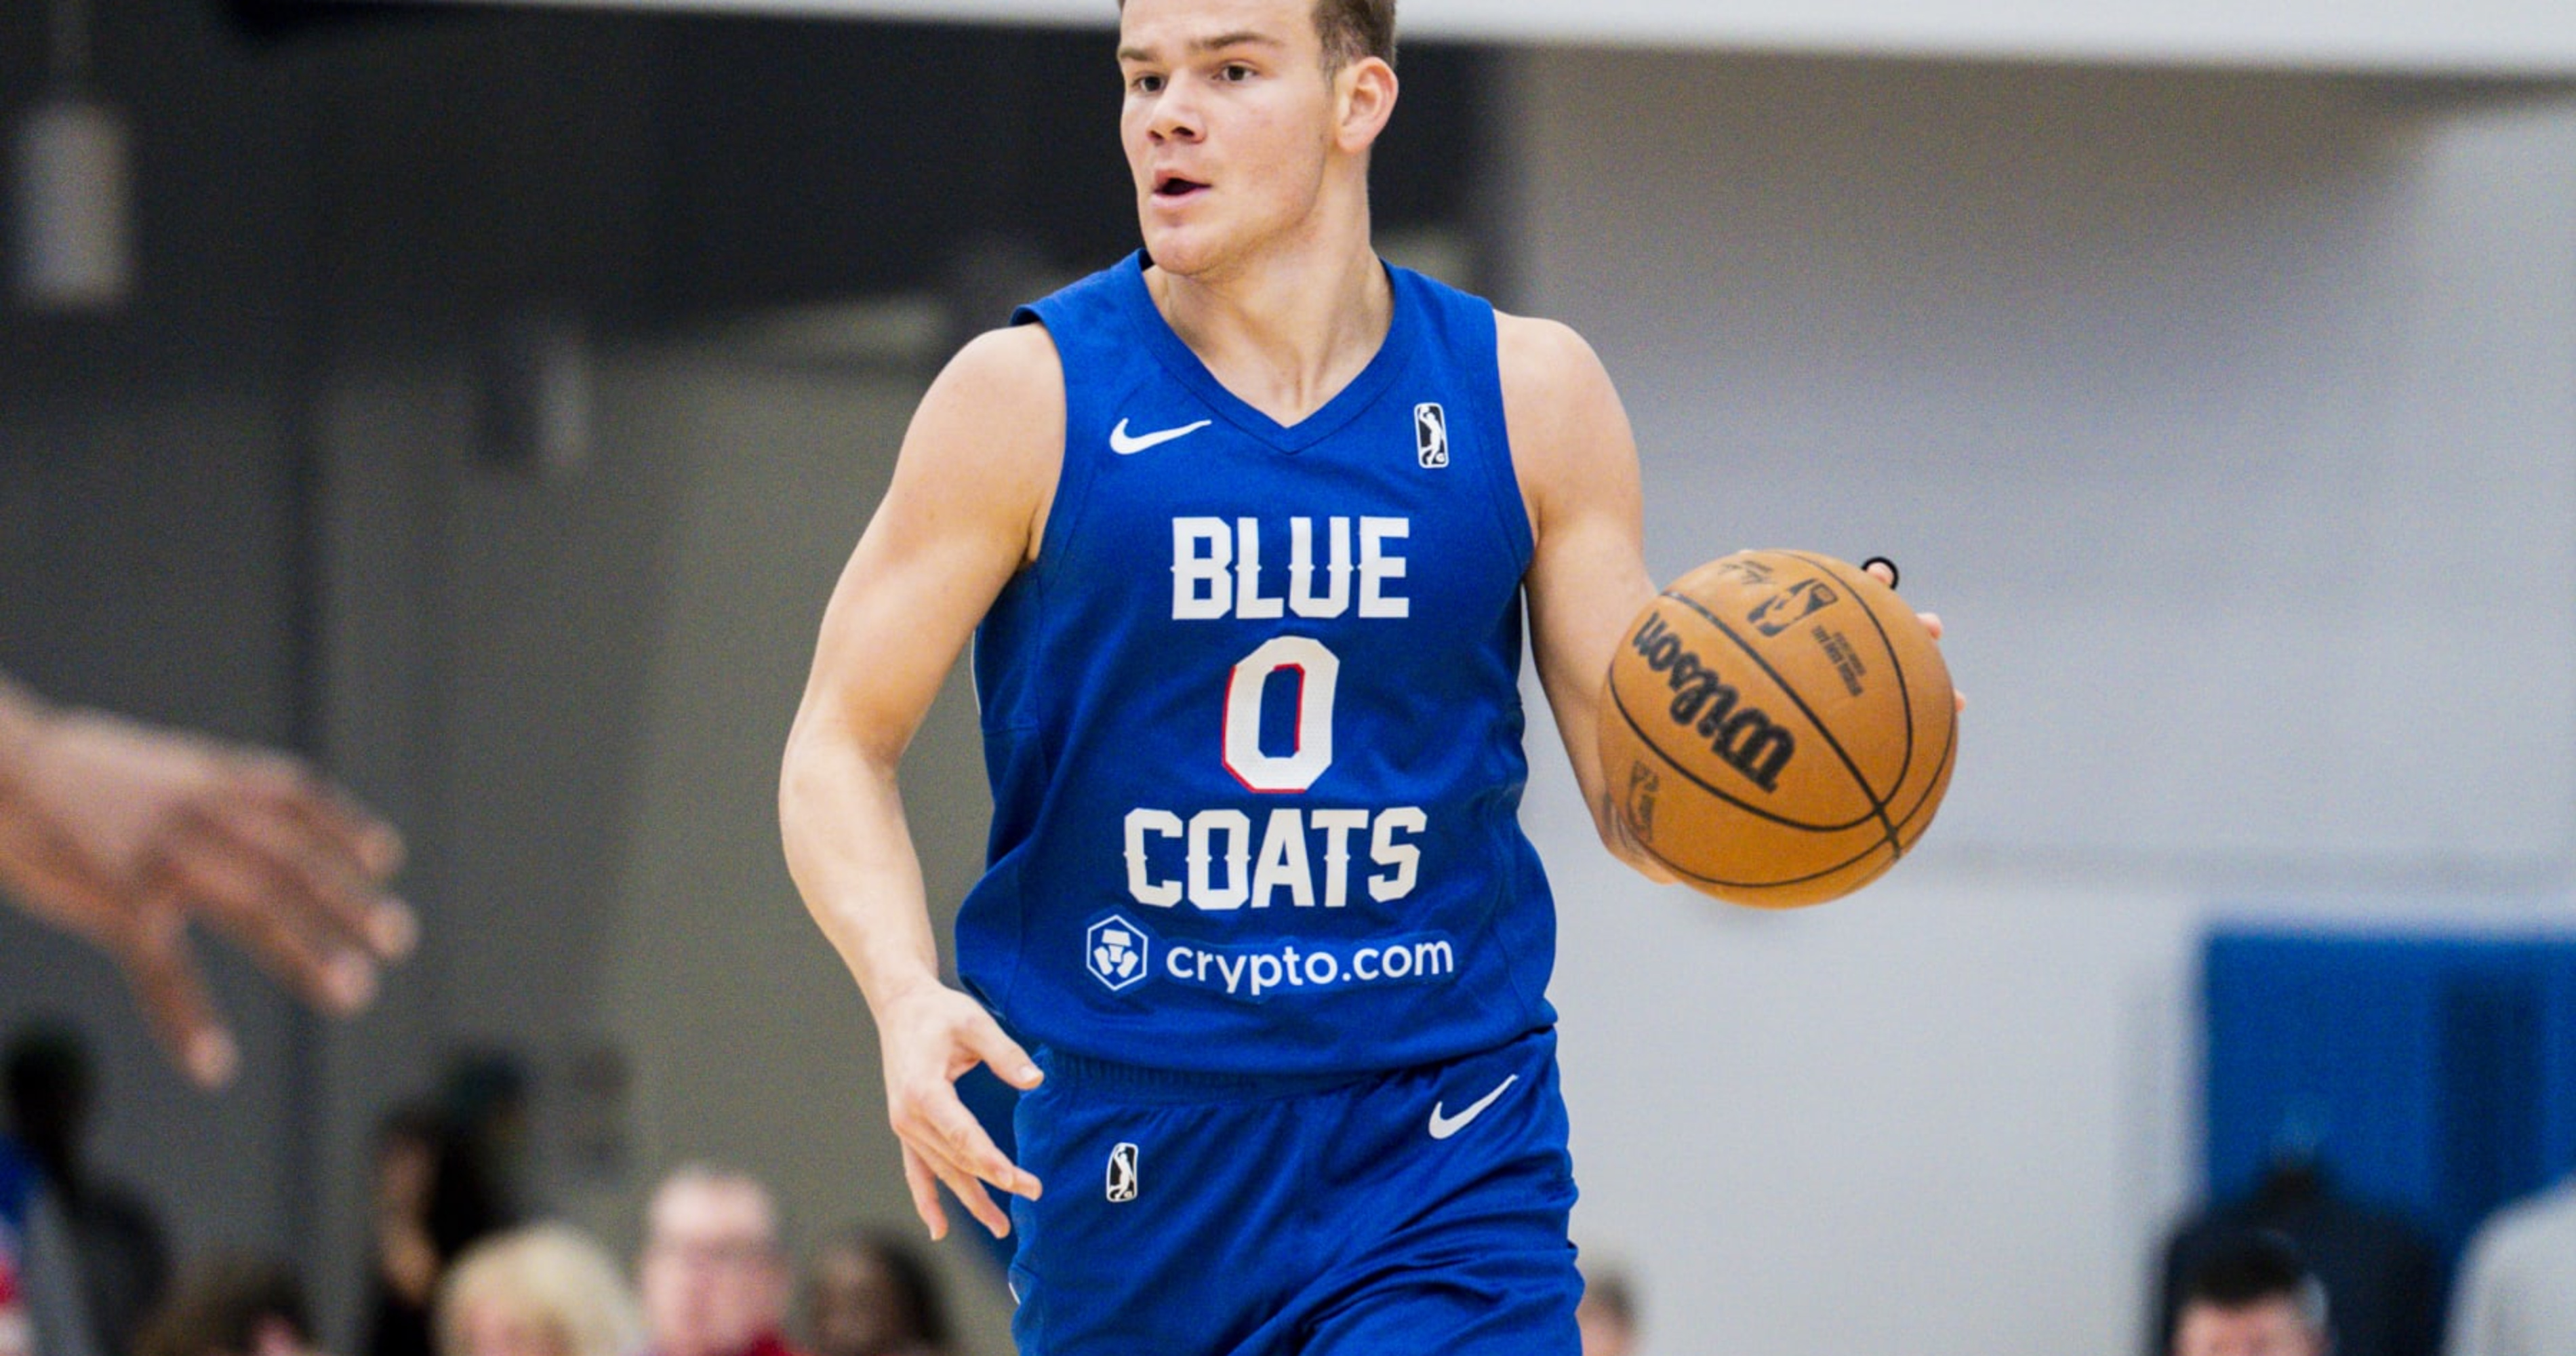 Mac McClung wins NBA Dunk Contest while wearing former high school jersey -  Sports Illustrated High School News, Analysis and More